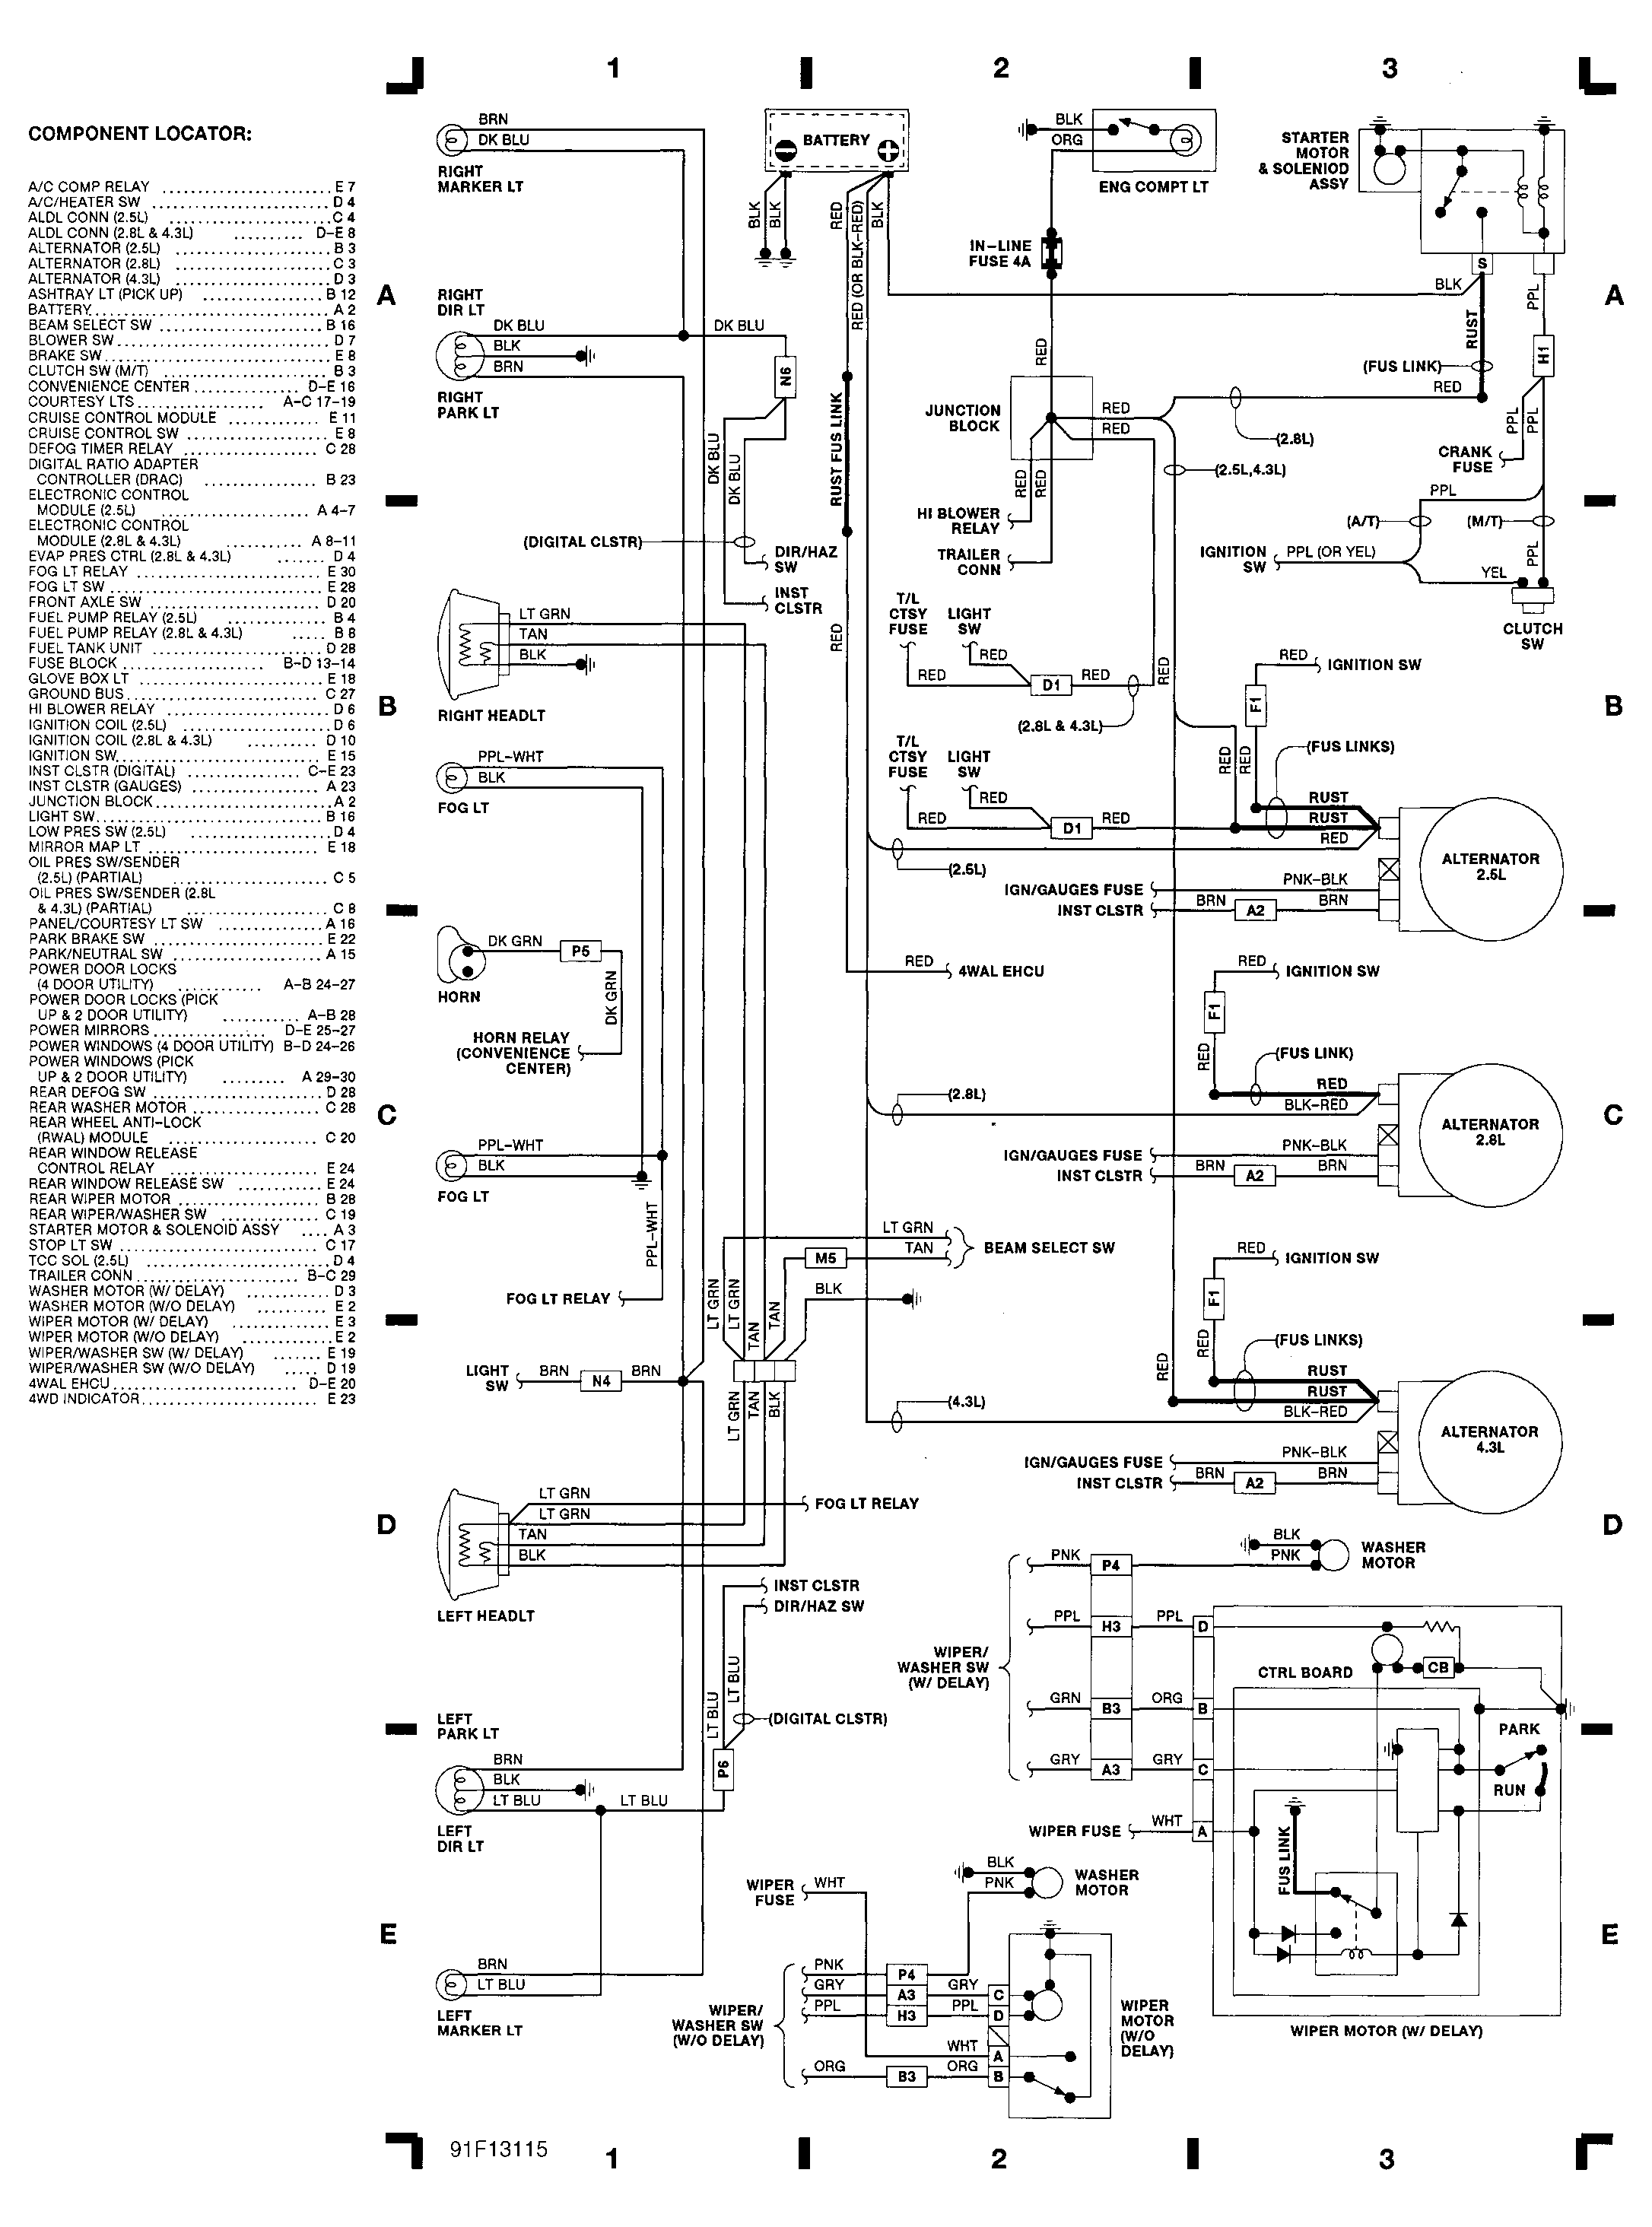 Aac Wiring Diagram For 95 S10 Pickup - Wiring Diagram Networks 98 Chevy Truck Keeps Blowing Dash Light Fuses